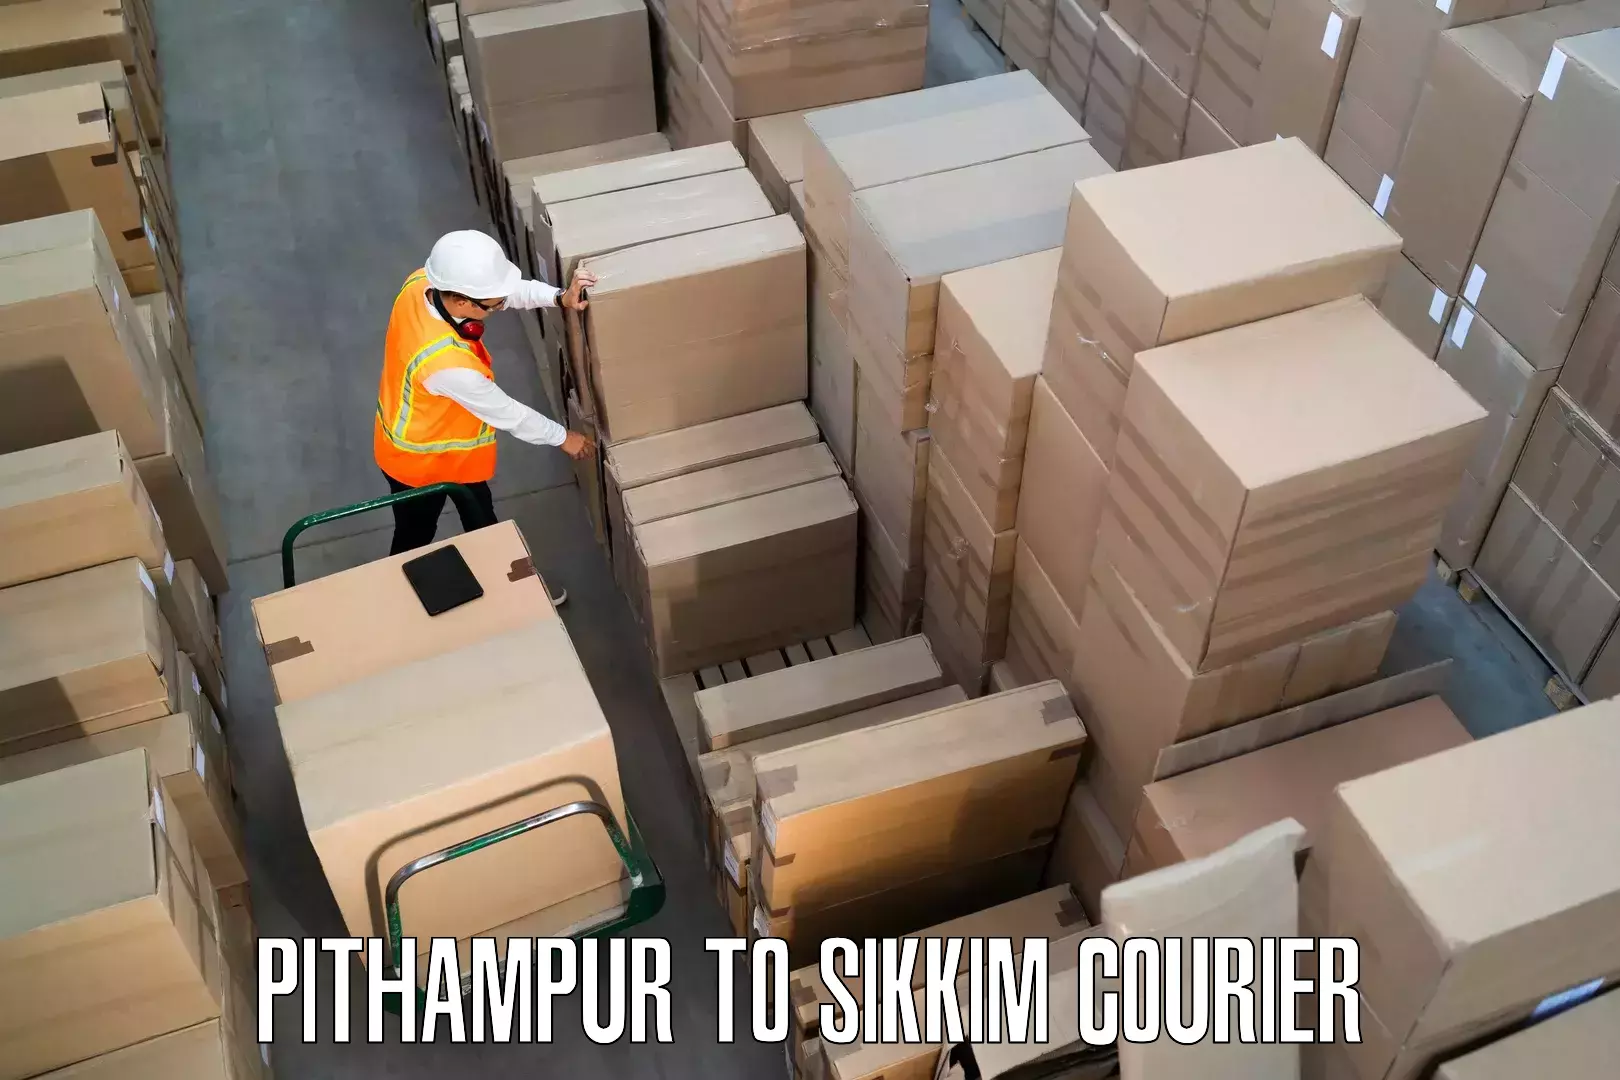 Furniture delivery service Pithampur to Rangpo